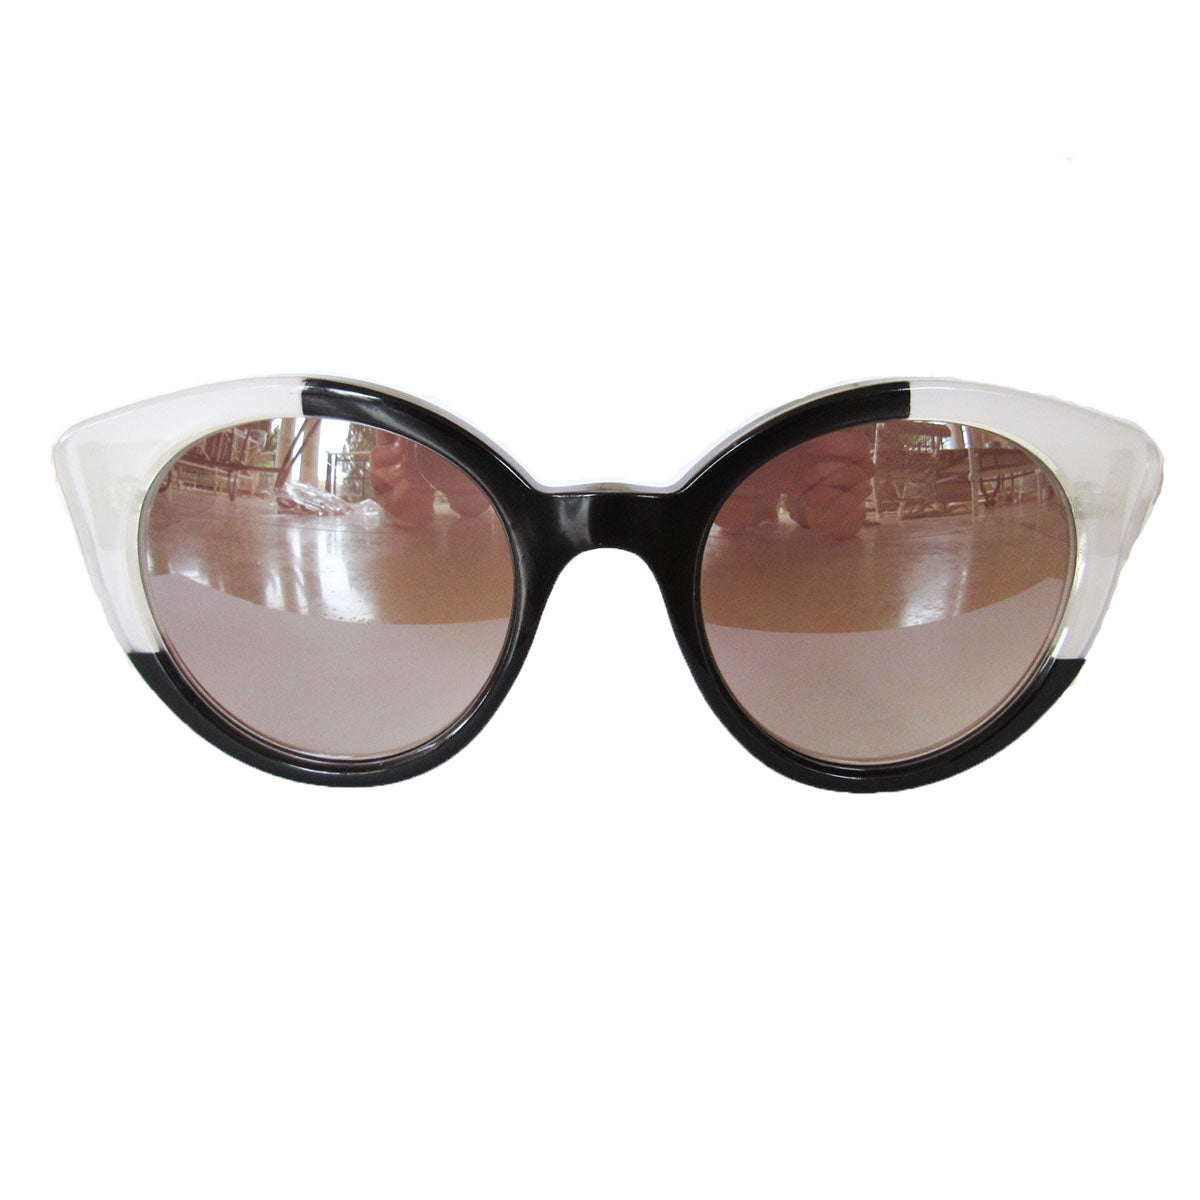 Round Cat Eye Black and Pearly Coloured Sunglasses w/ Silver Mirrored Lenses